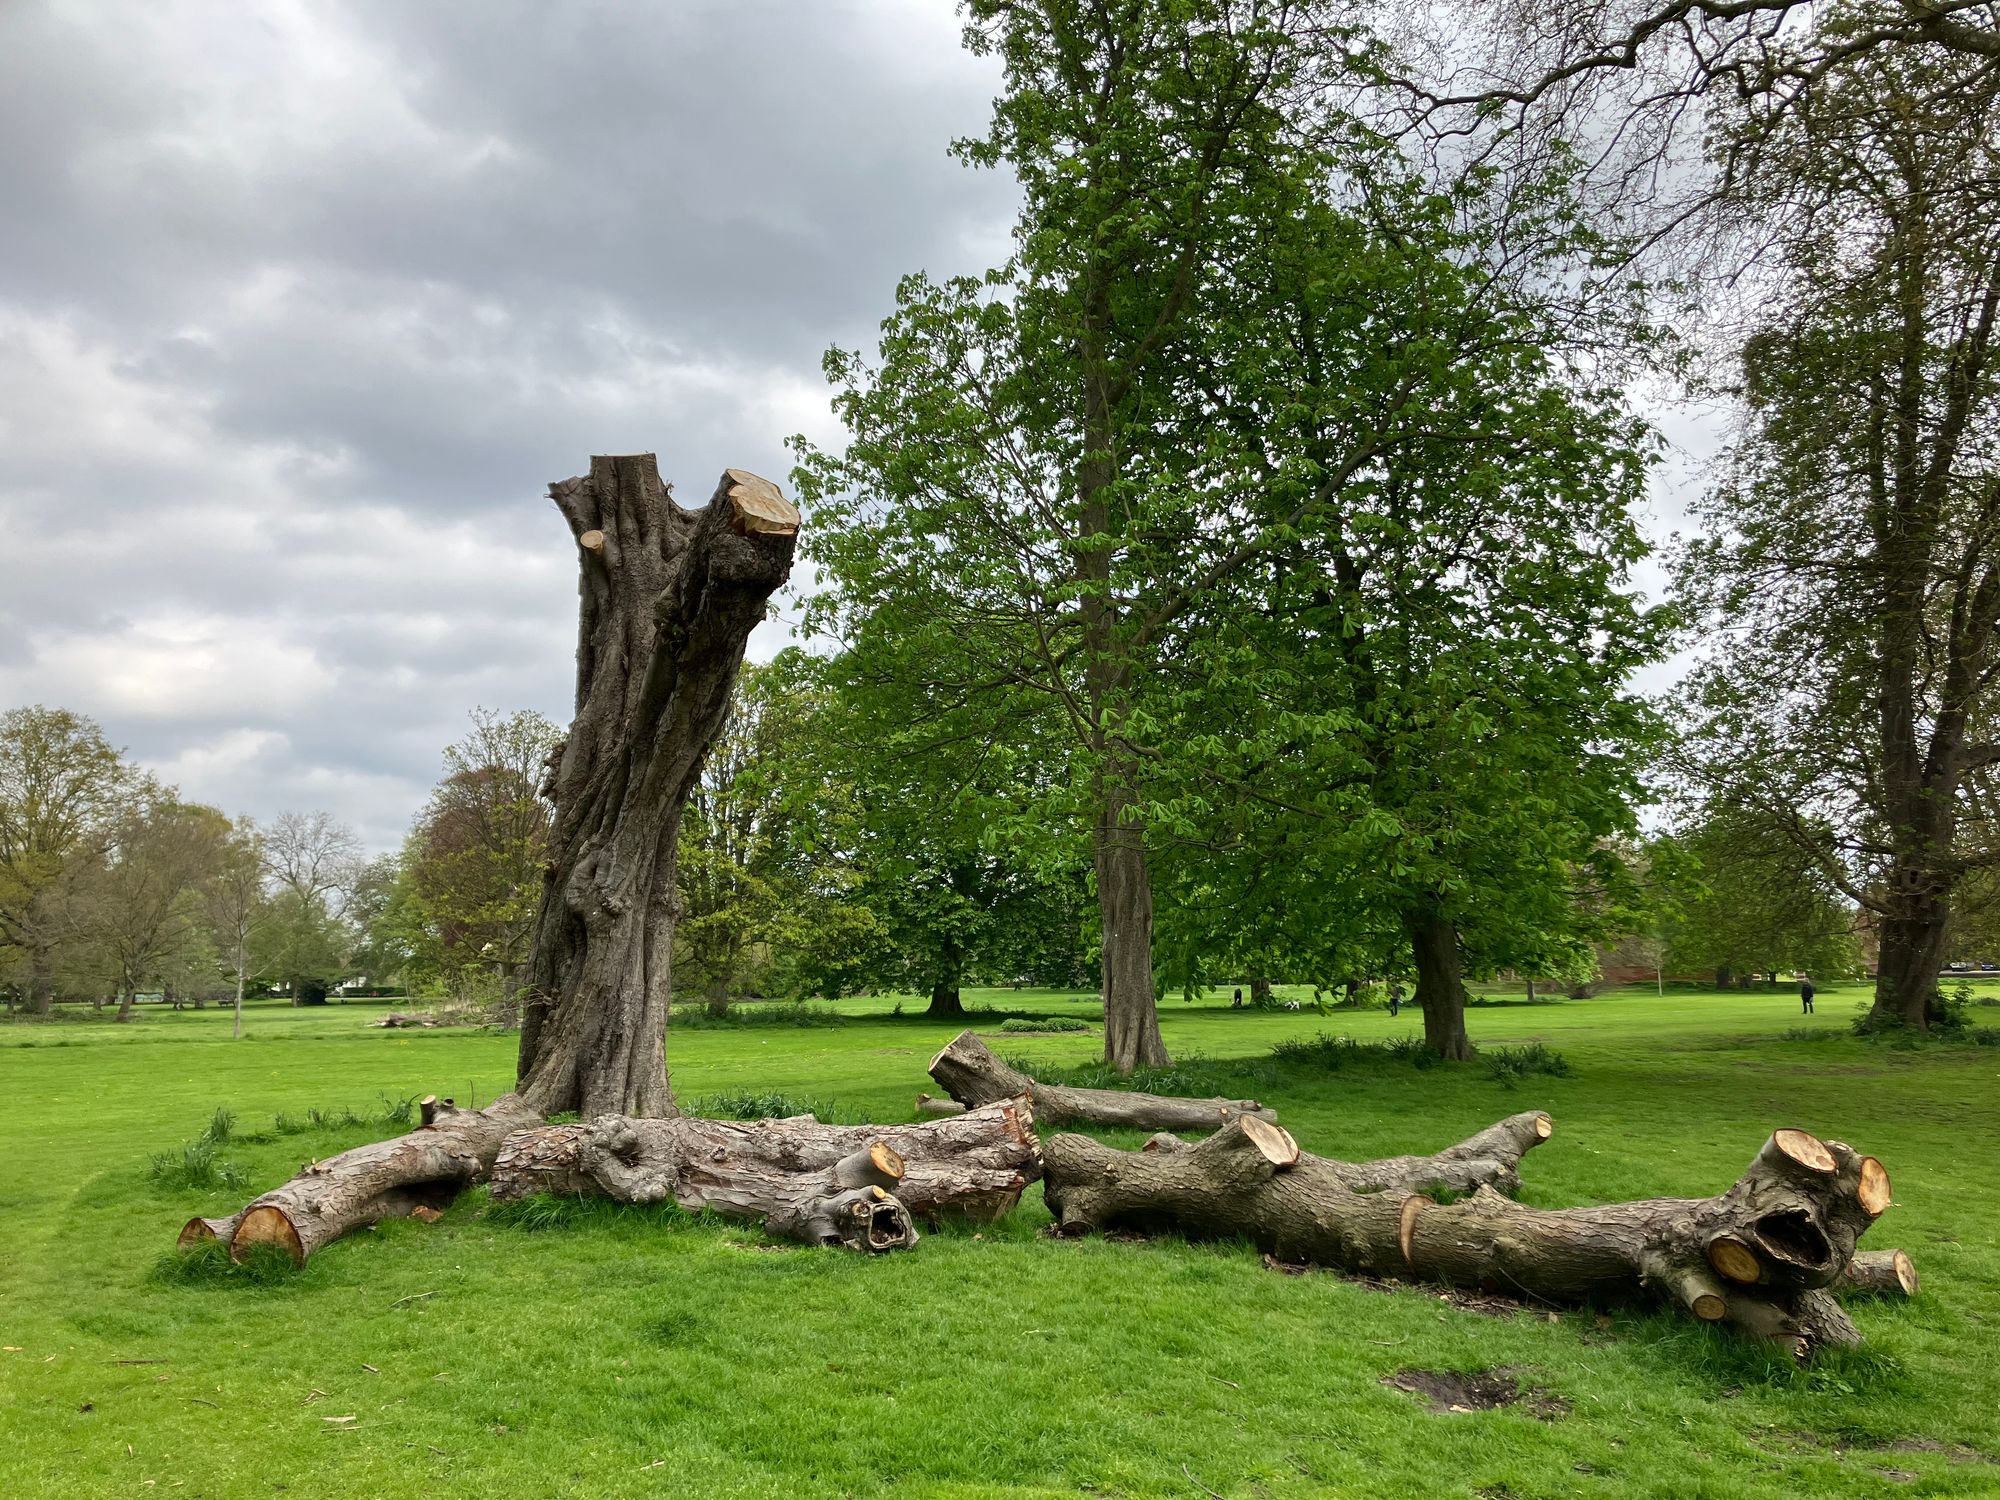 How London's trees became chronicles of climate change